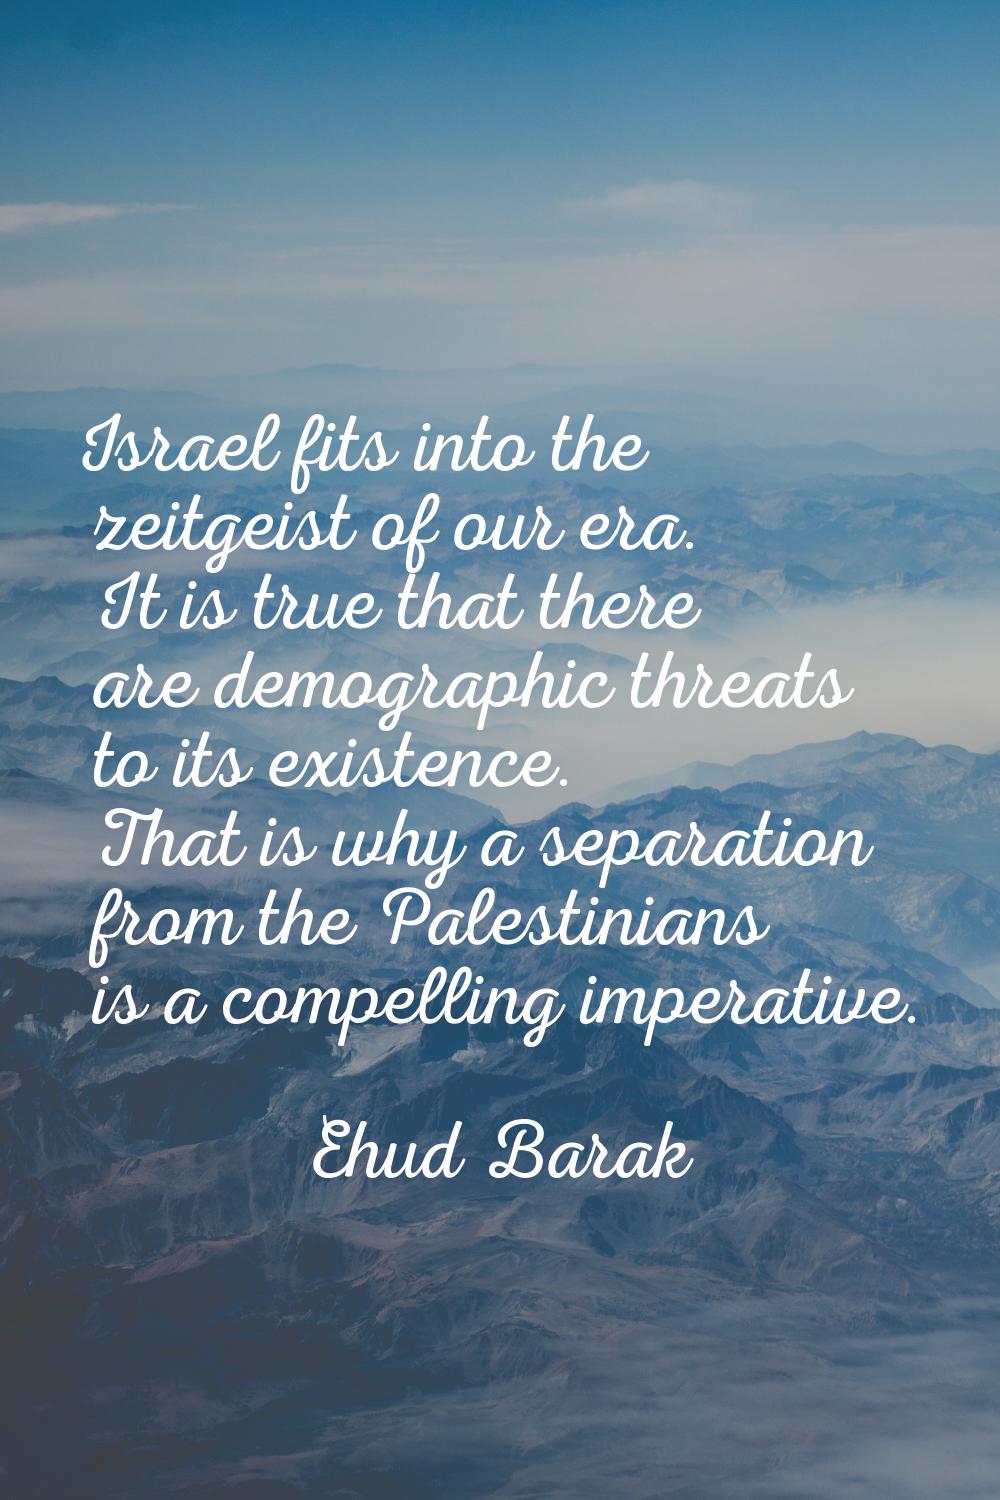 Israel fits into the zeitgeist of our era. It is true that there are demographic threats to its exi